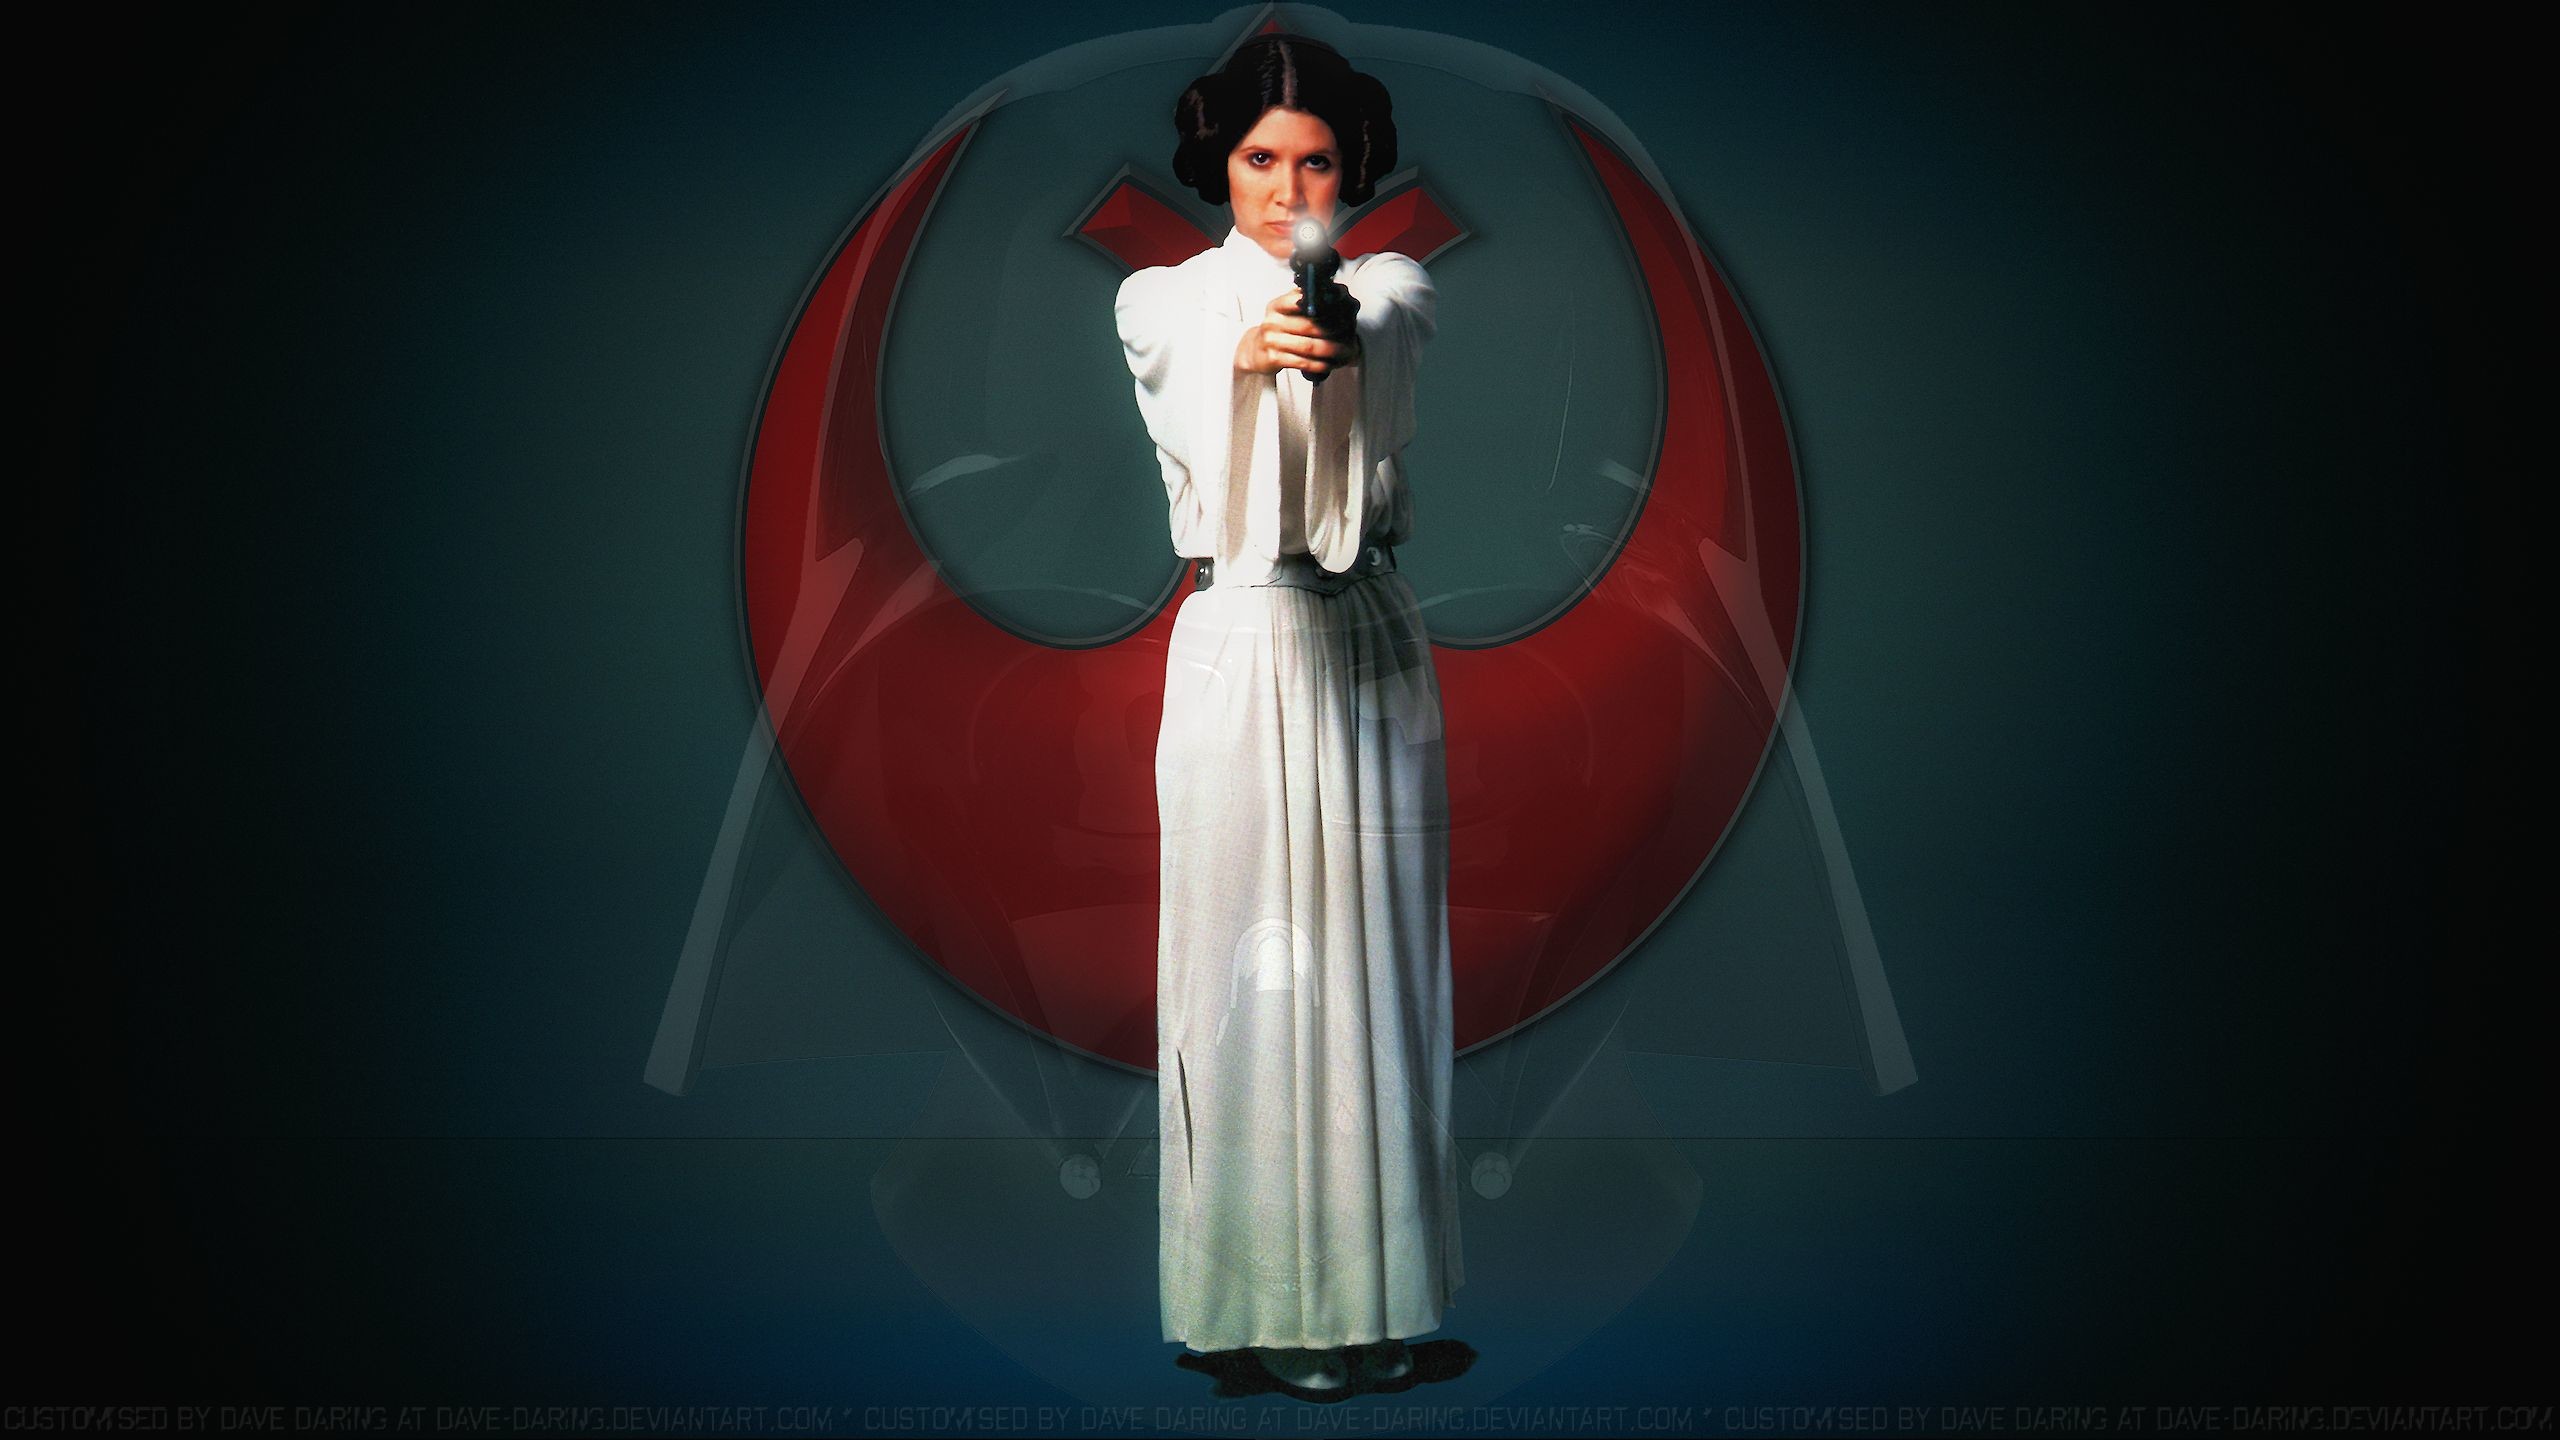 2560x1440 ... Carrie Fisher Princess Leia XL by Dave-Daring